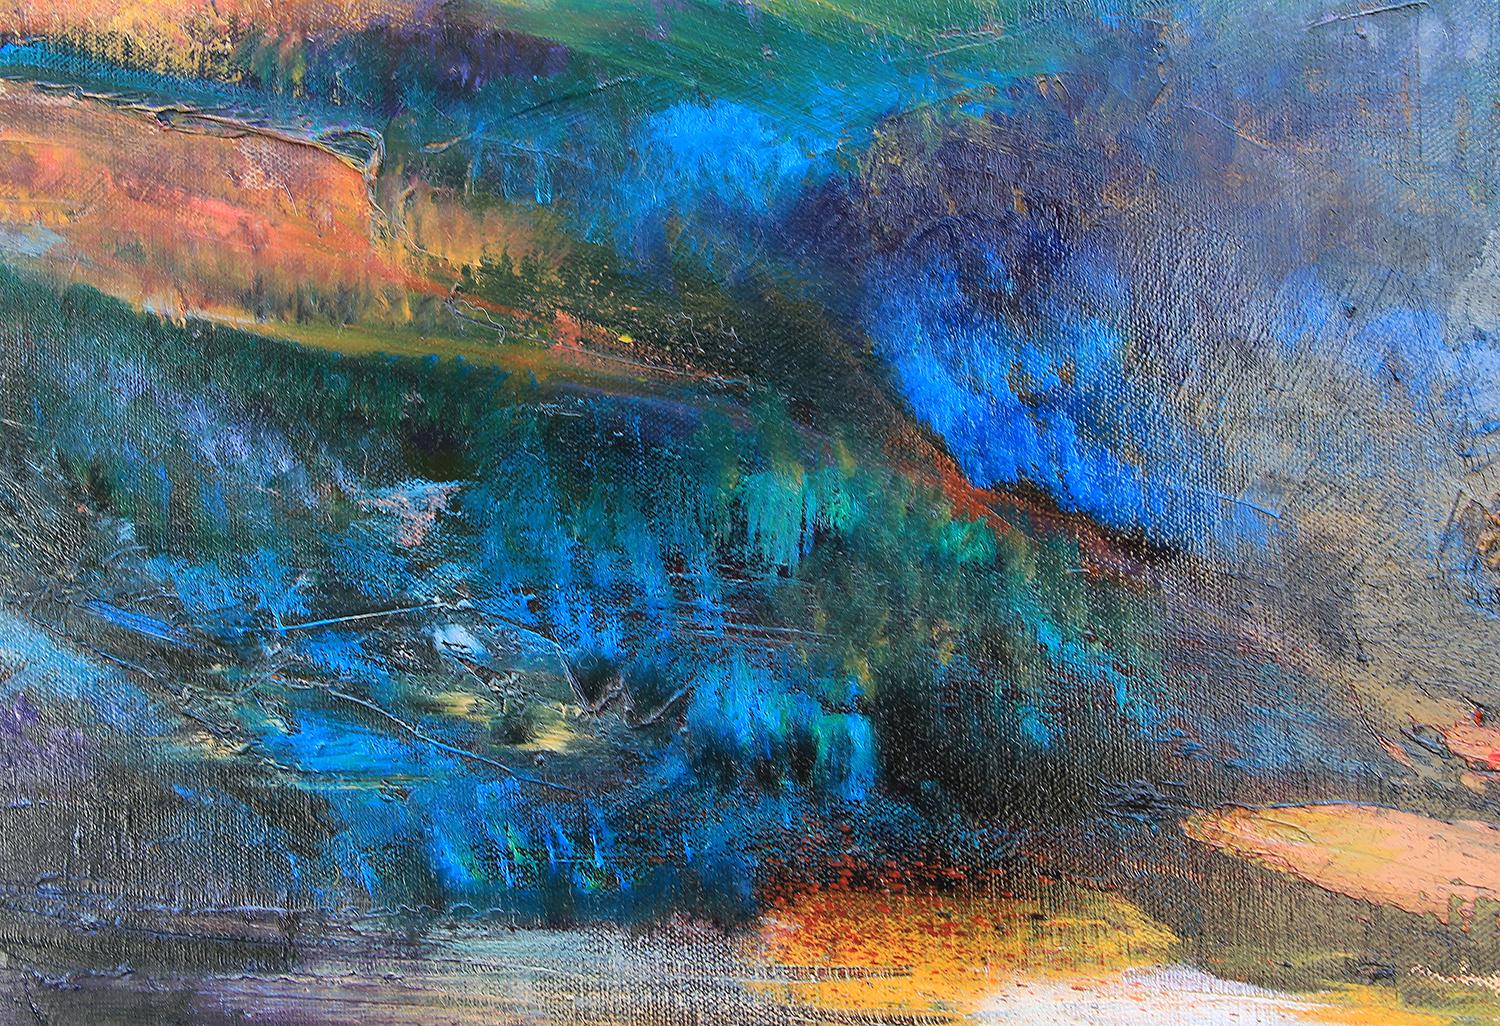 Dark toned impressionist painting by Houston, Texas artist Sha Mo. Abstract painting with blue, green, red, and orange accents depicting landscape with flowing lava and mountain ranges. Unframed but framing options are available.
